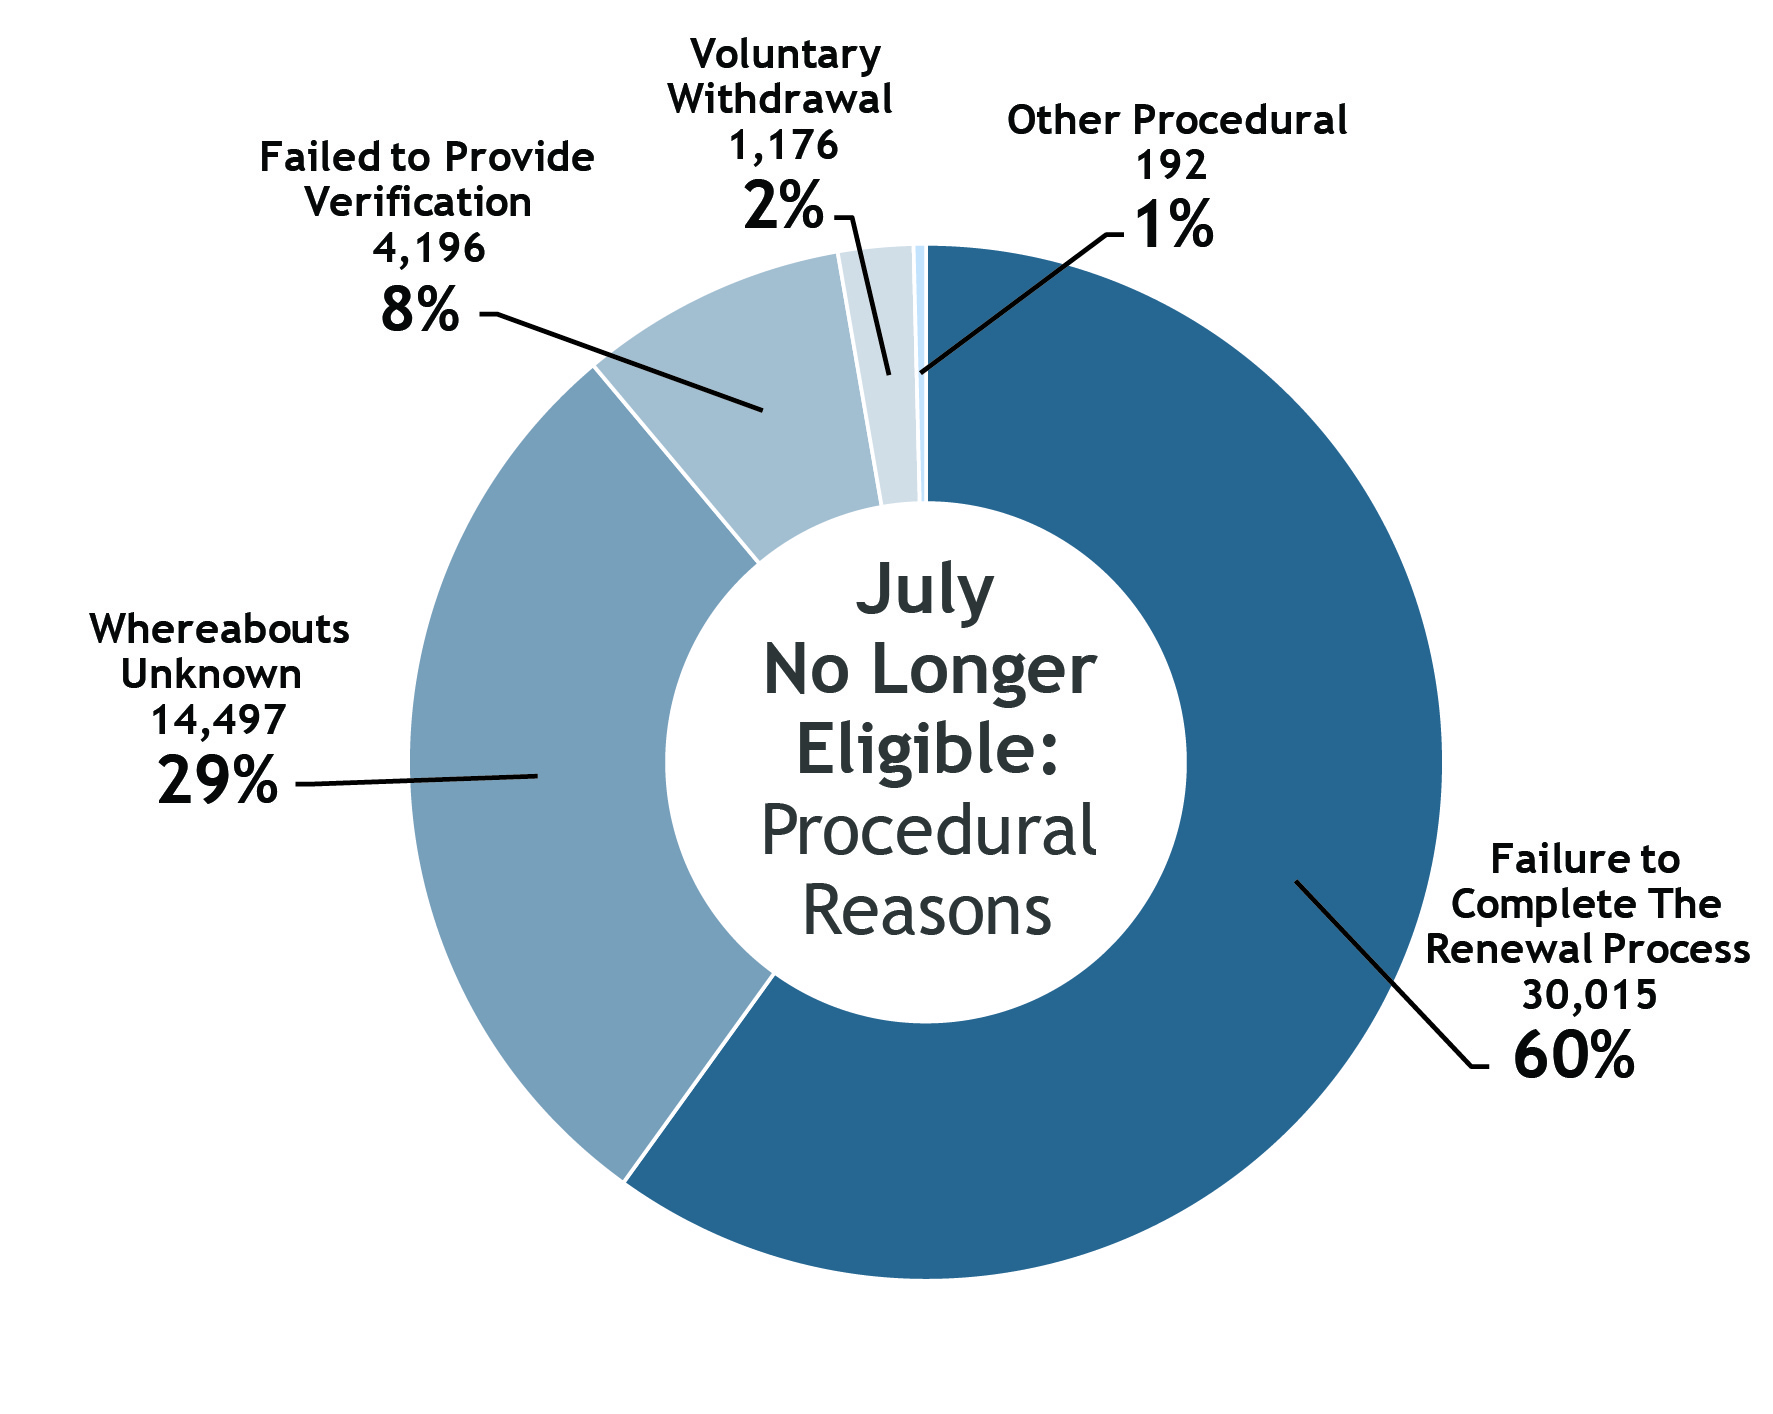 Donut chart showing detail of July Renewals section of No Longer Eligible for Procedural Reasons with failure to complete the renewal process 30,015 the largest at 60%, whereabouts unknown 14,497 at 29%, failed to provide verification 4,196 at 8%, voluntary withdrawal 1,176 at 2% and other procedural 192 at 1%.